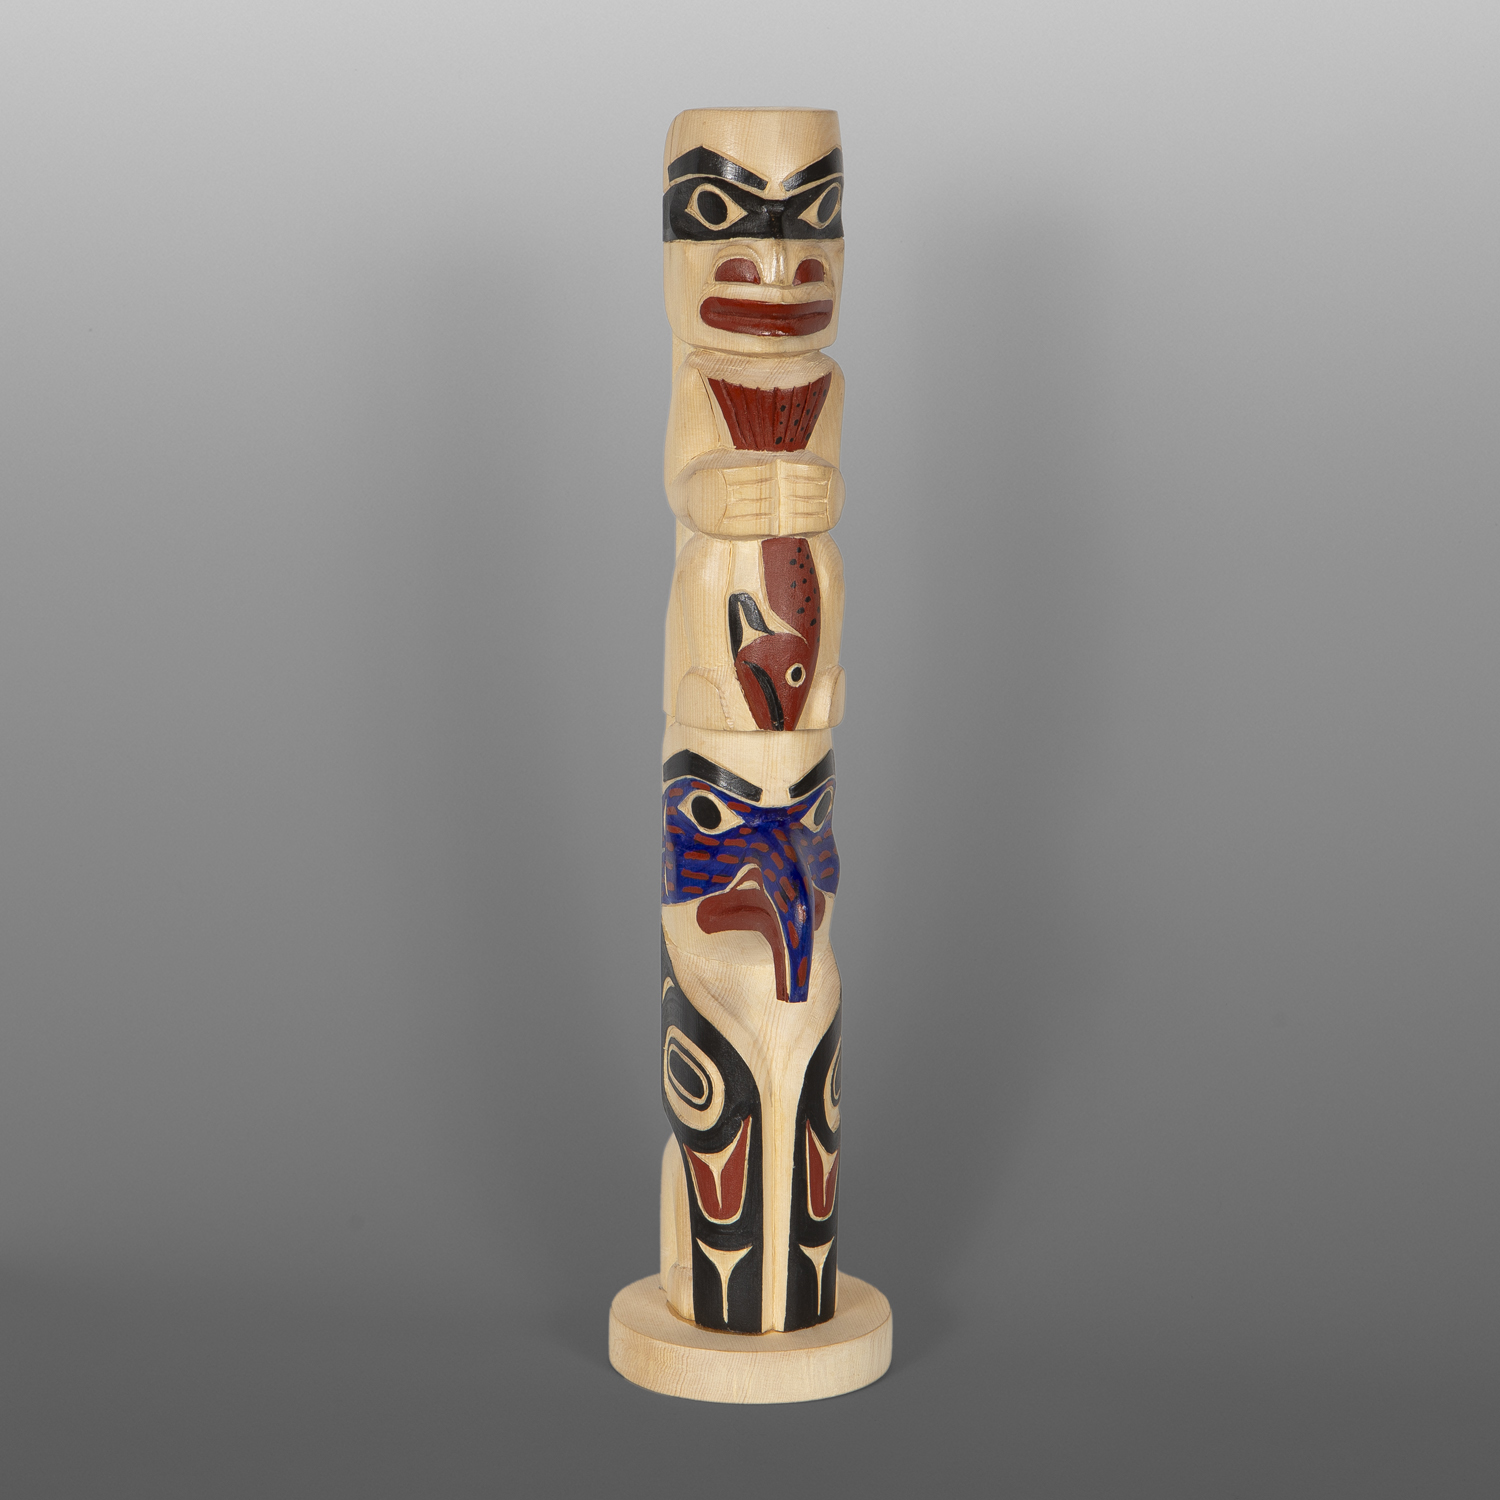 Eagle and the Young Chief Maquette
David A. Boxley
Yellow cedar, paint
11" x 2¼" x 1½”